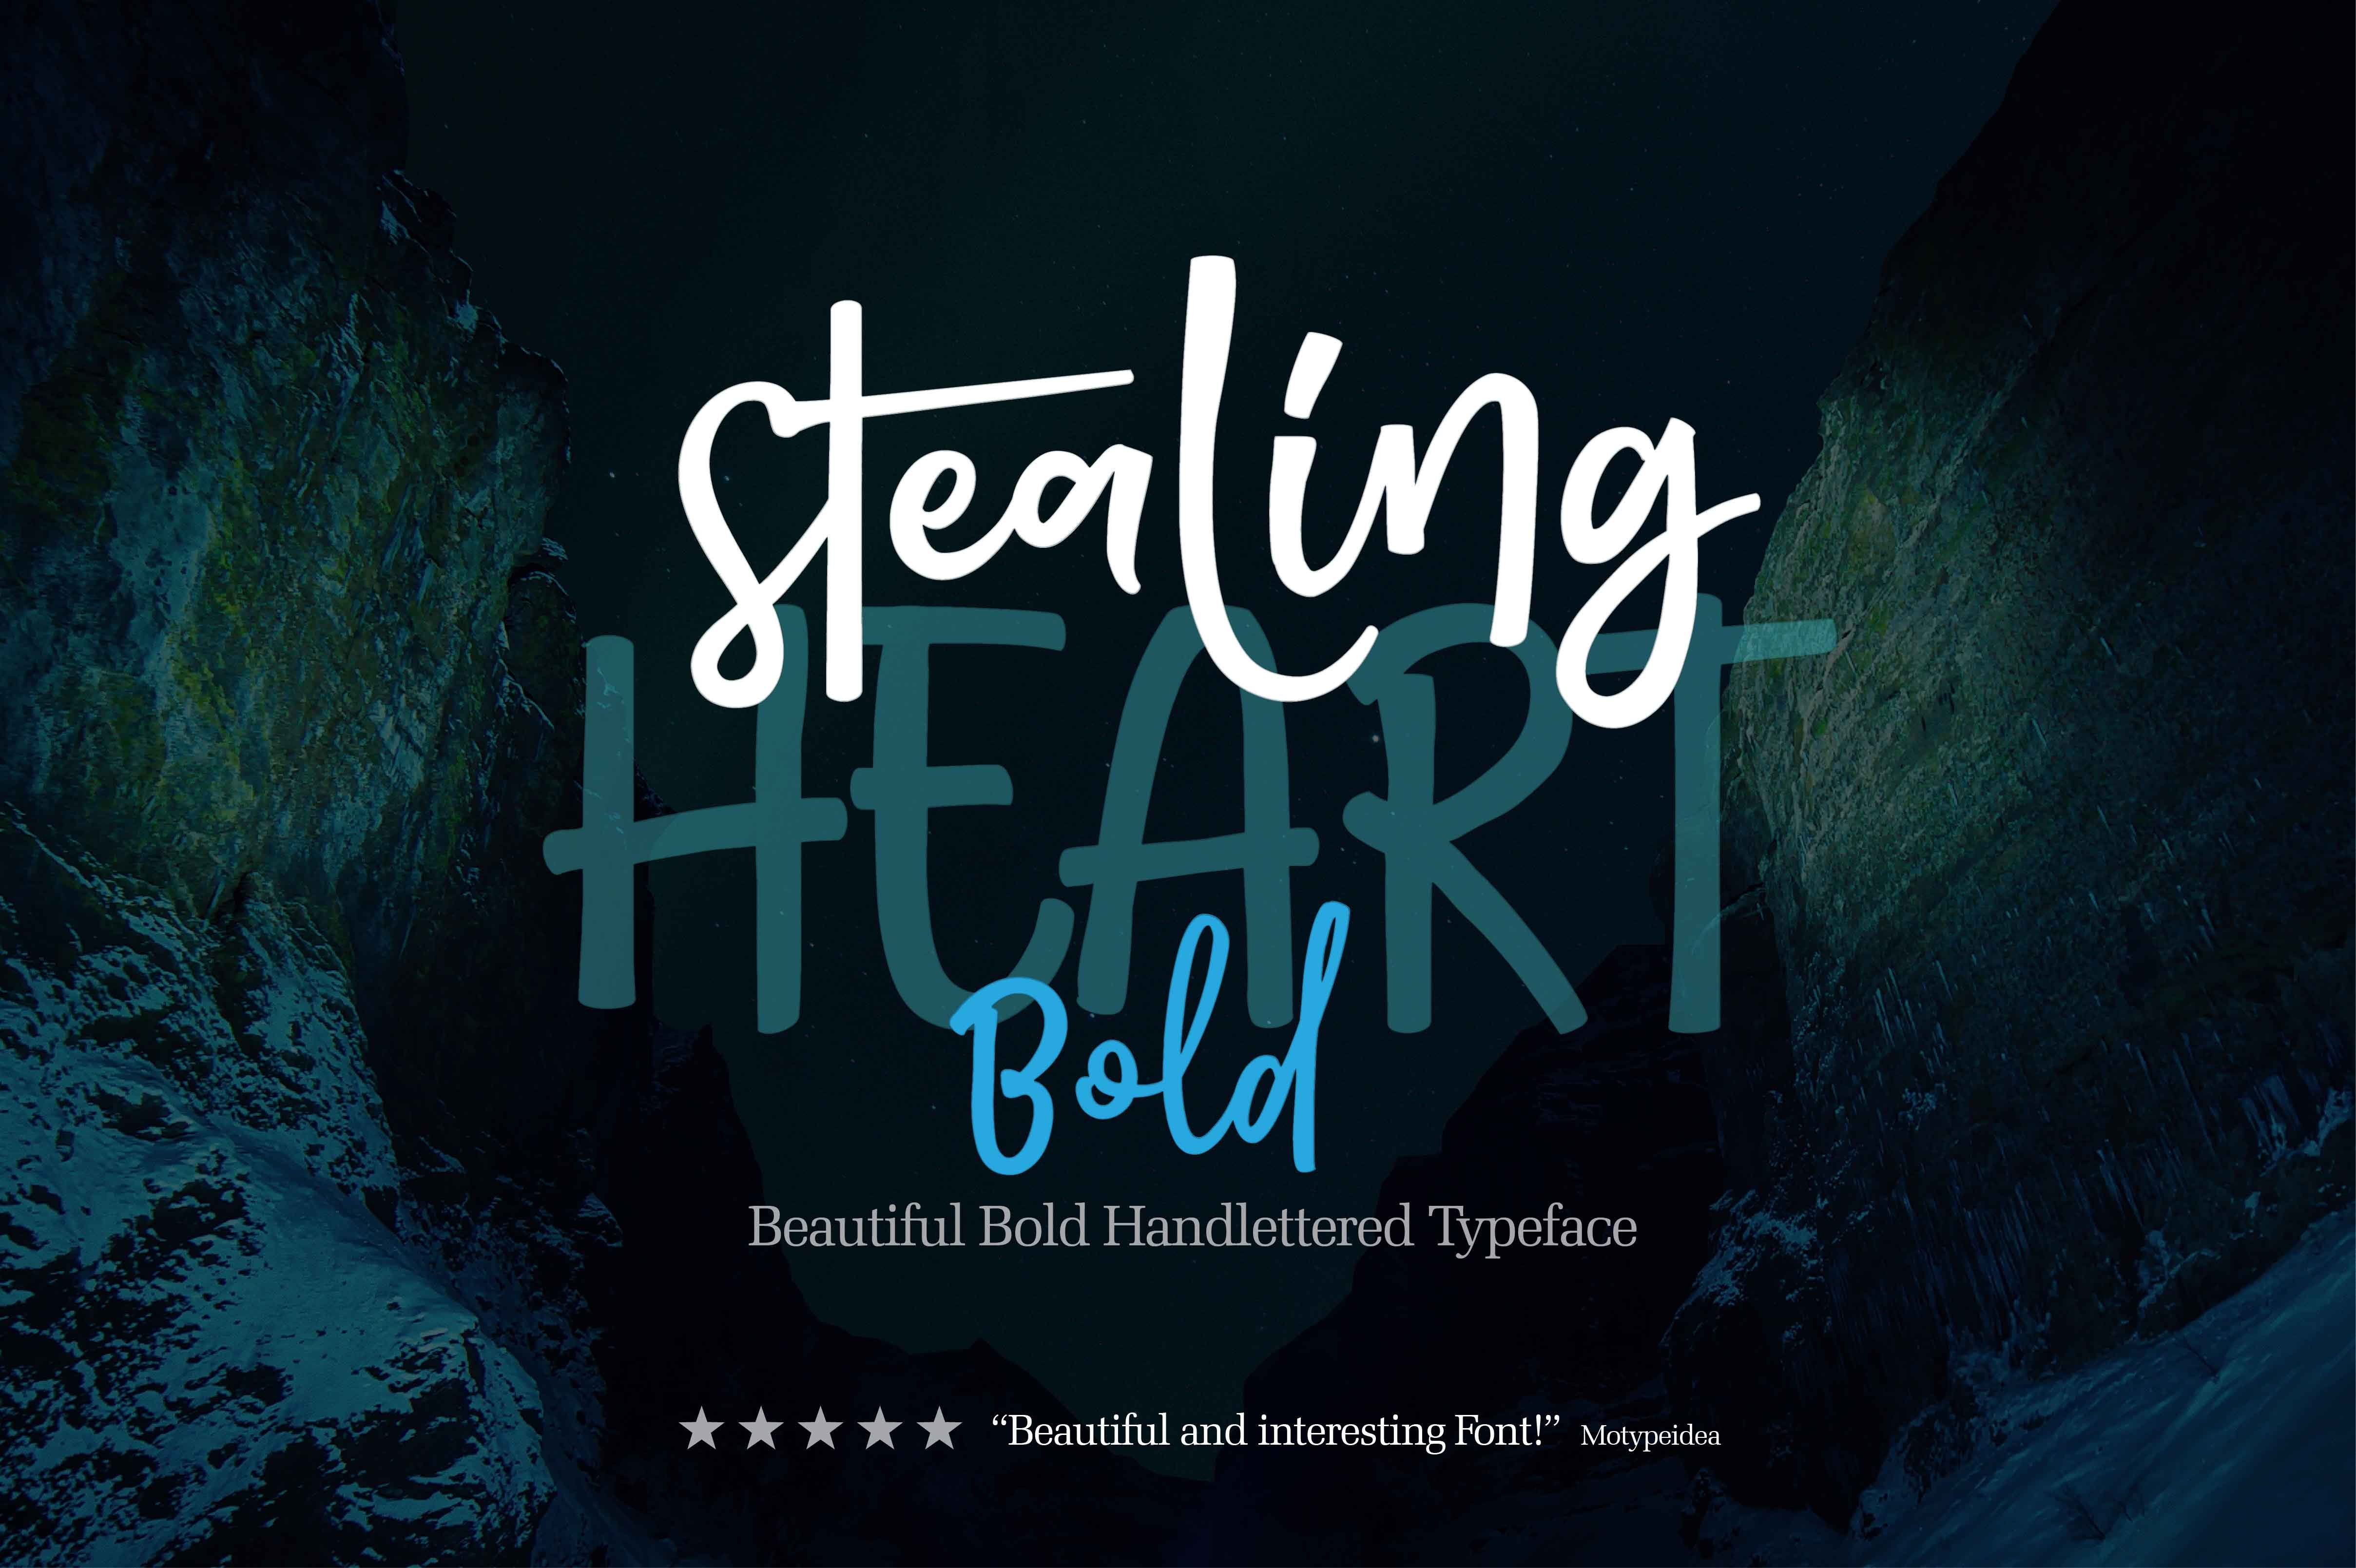 STEALING HEART BOLD cover image.